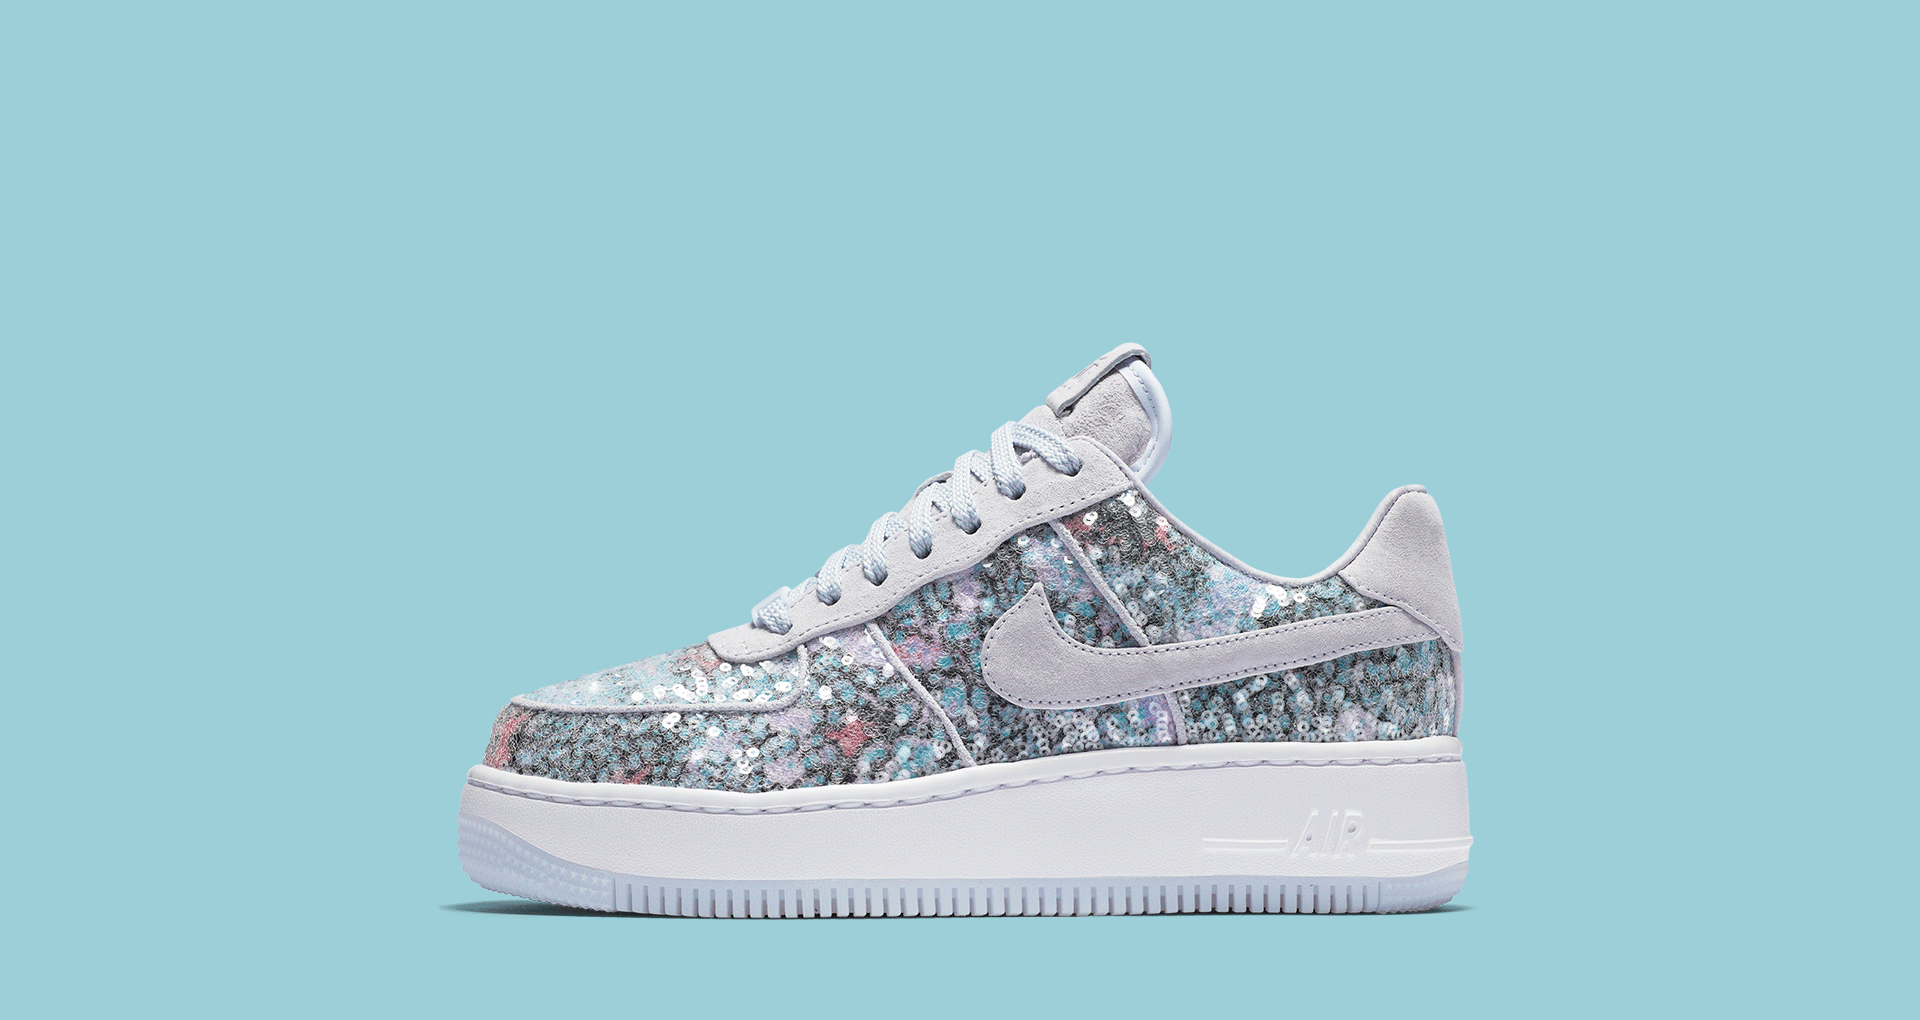 wmns-nike-air-force-1-upstep-low-glass-slipper-1